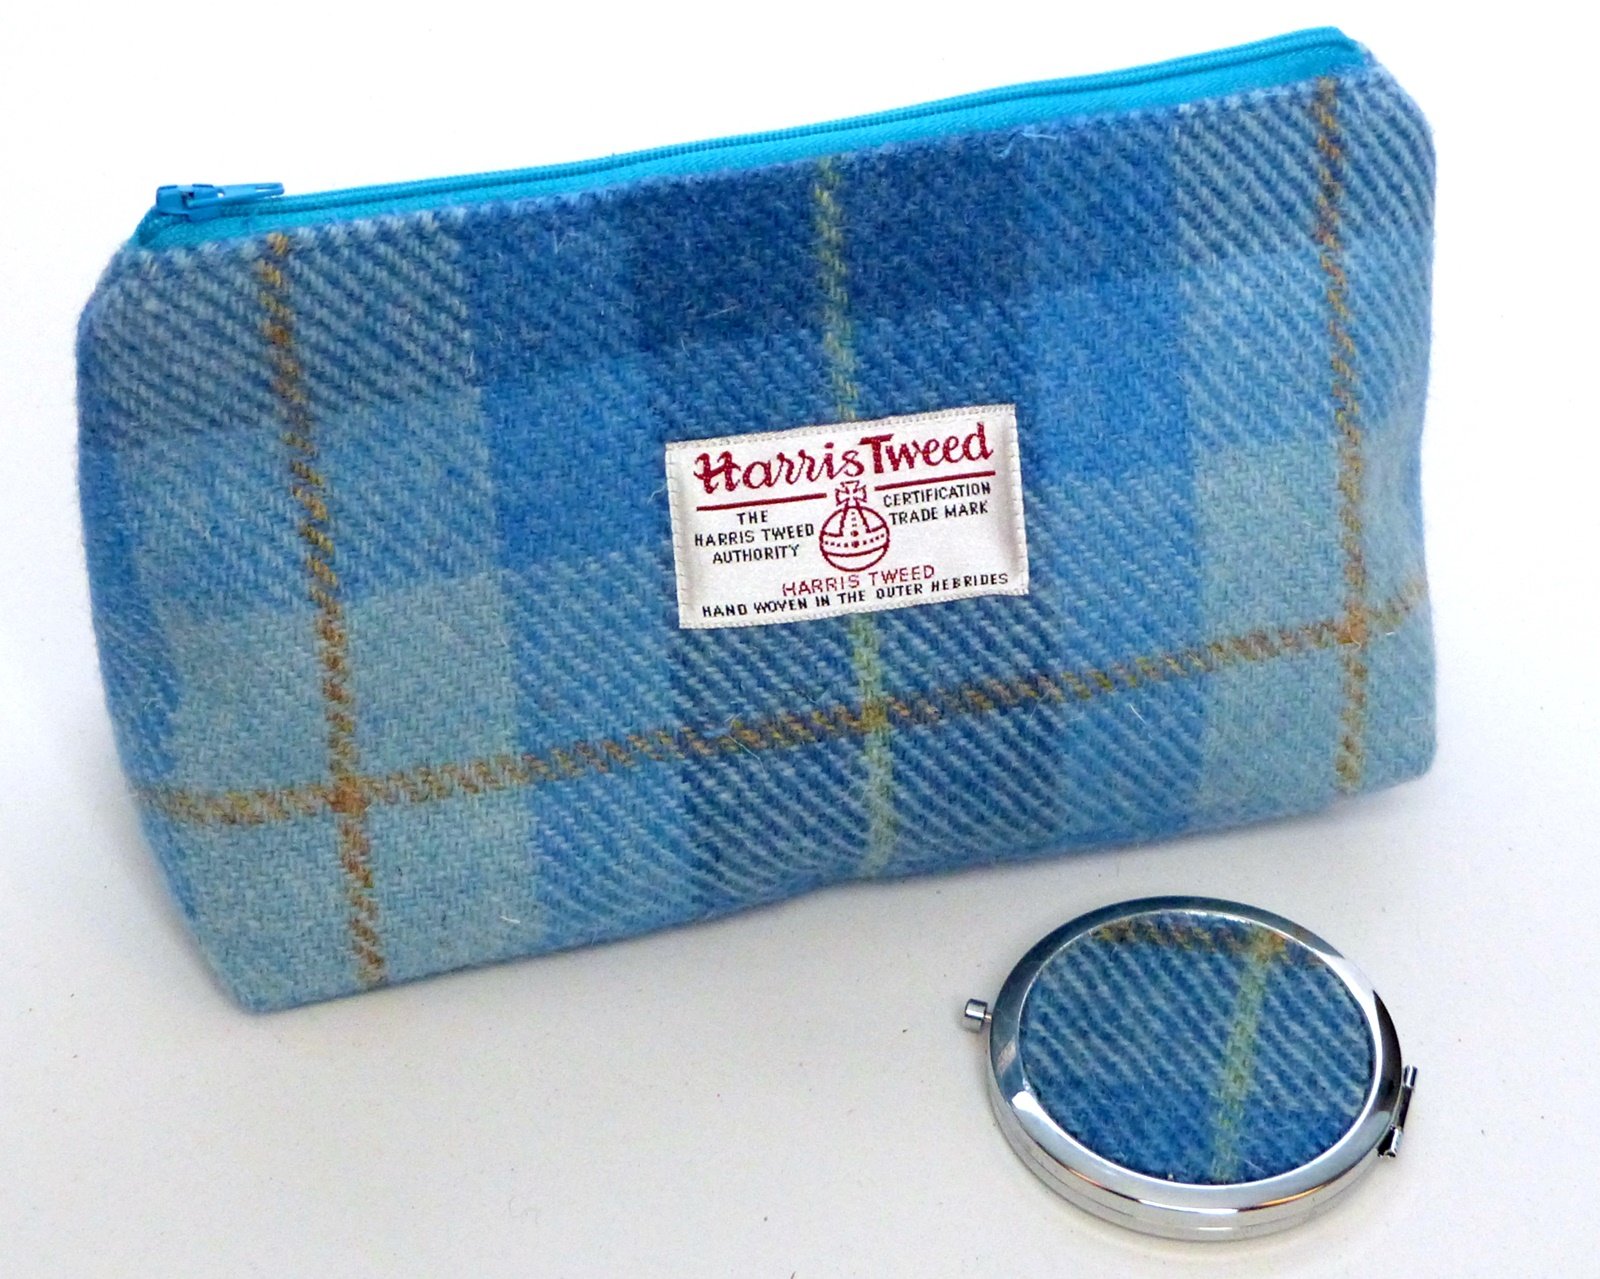 Cosmetic bag Blue shades of checked Harris Tweed with matching compact mirror Make-up bag